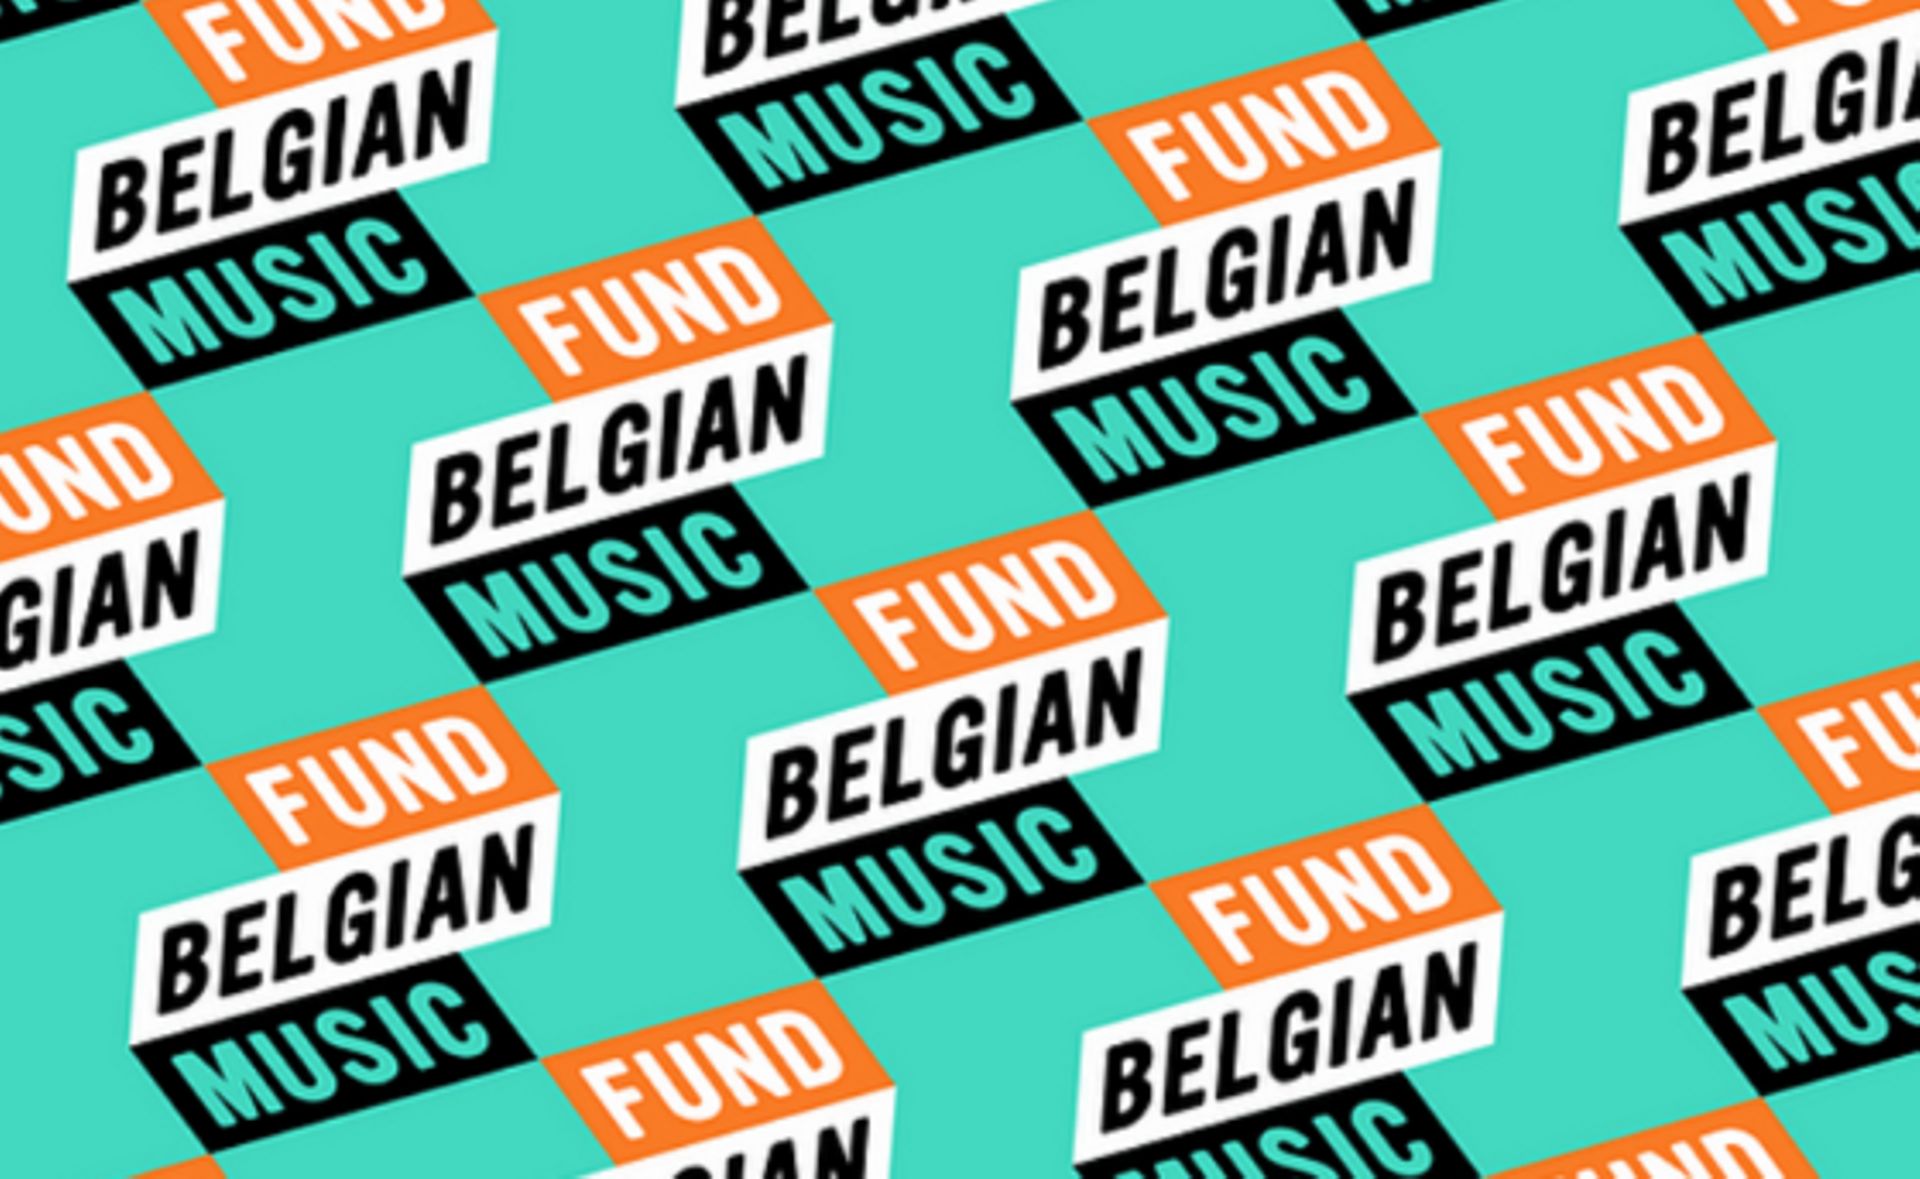 PlayRight and Sabam continue to work together after Fund Belgian Music